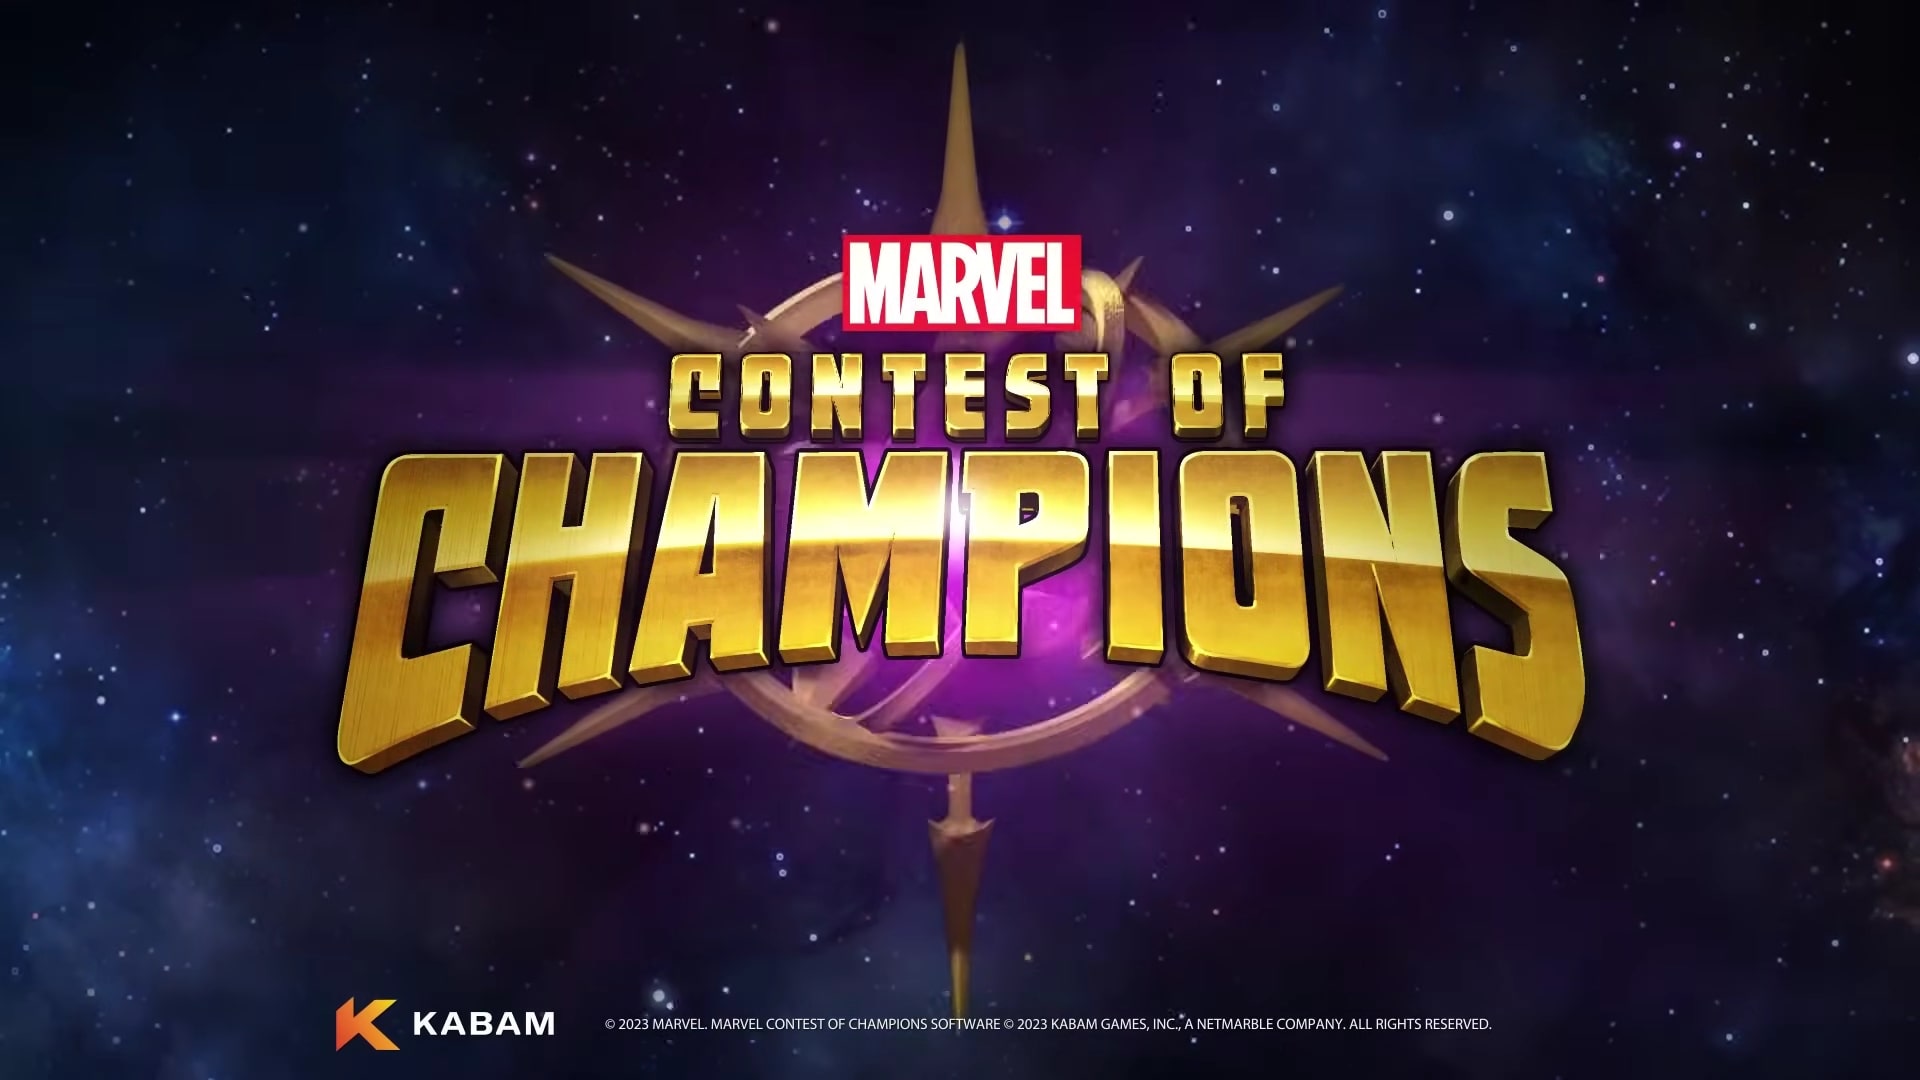 Marvel Contest of Champions Launches Exciting New Saga: X-Magica!